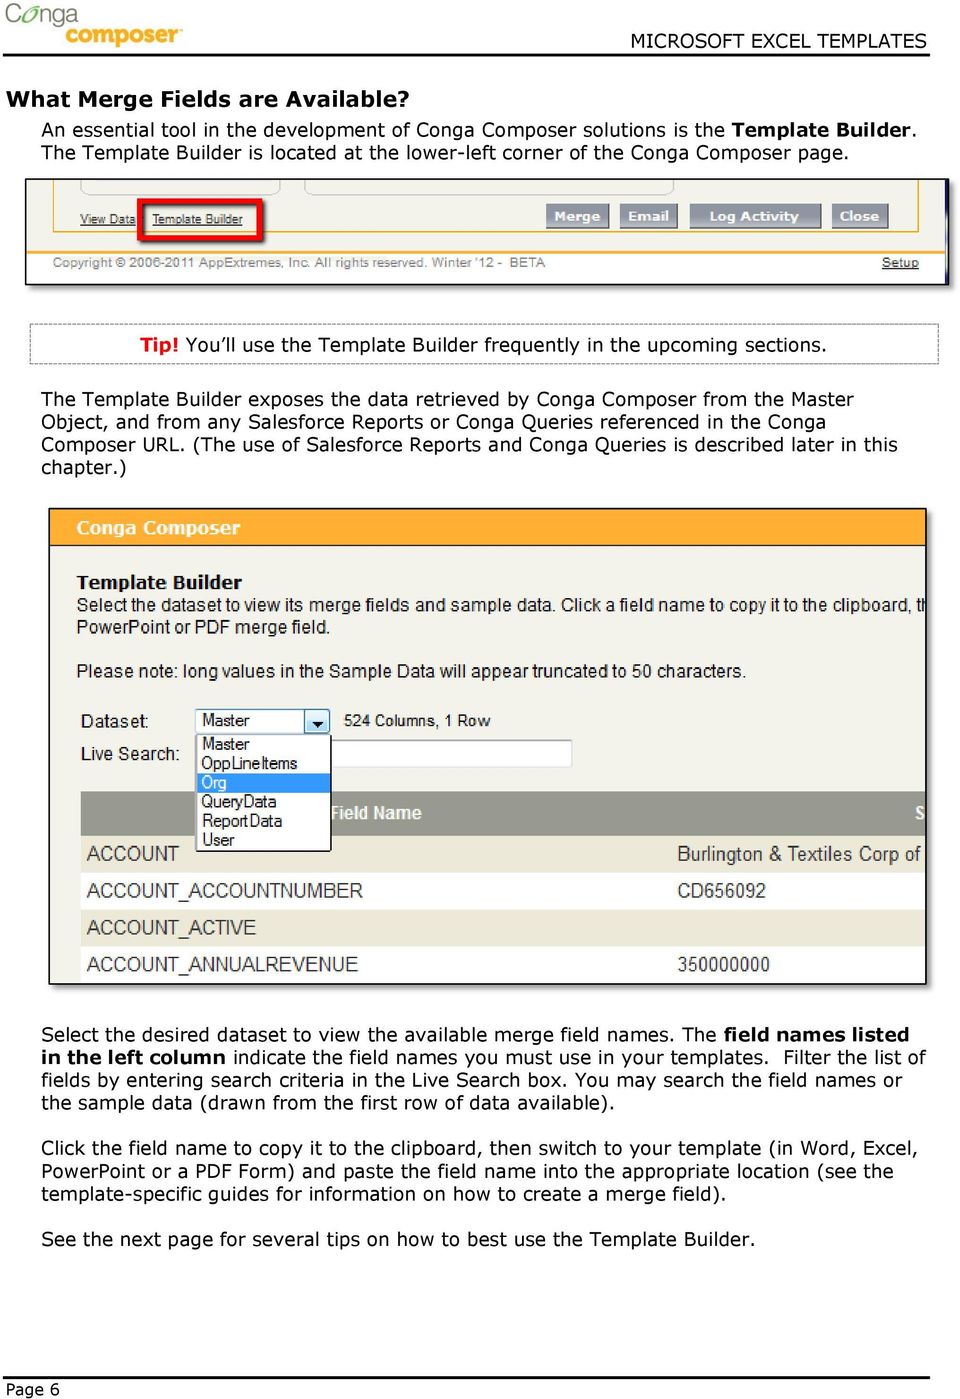 The Template Builder exposes the data retrieved by Conga Composer from the Master Object, and from any Salesforce Reports or Conga Queries referenced in the Conga Composer URL.